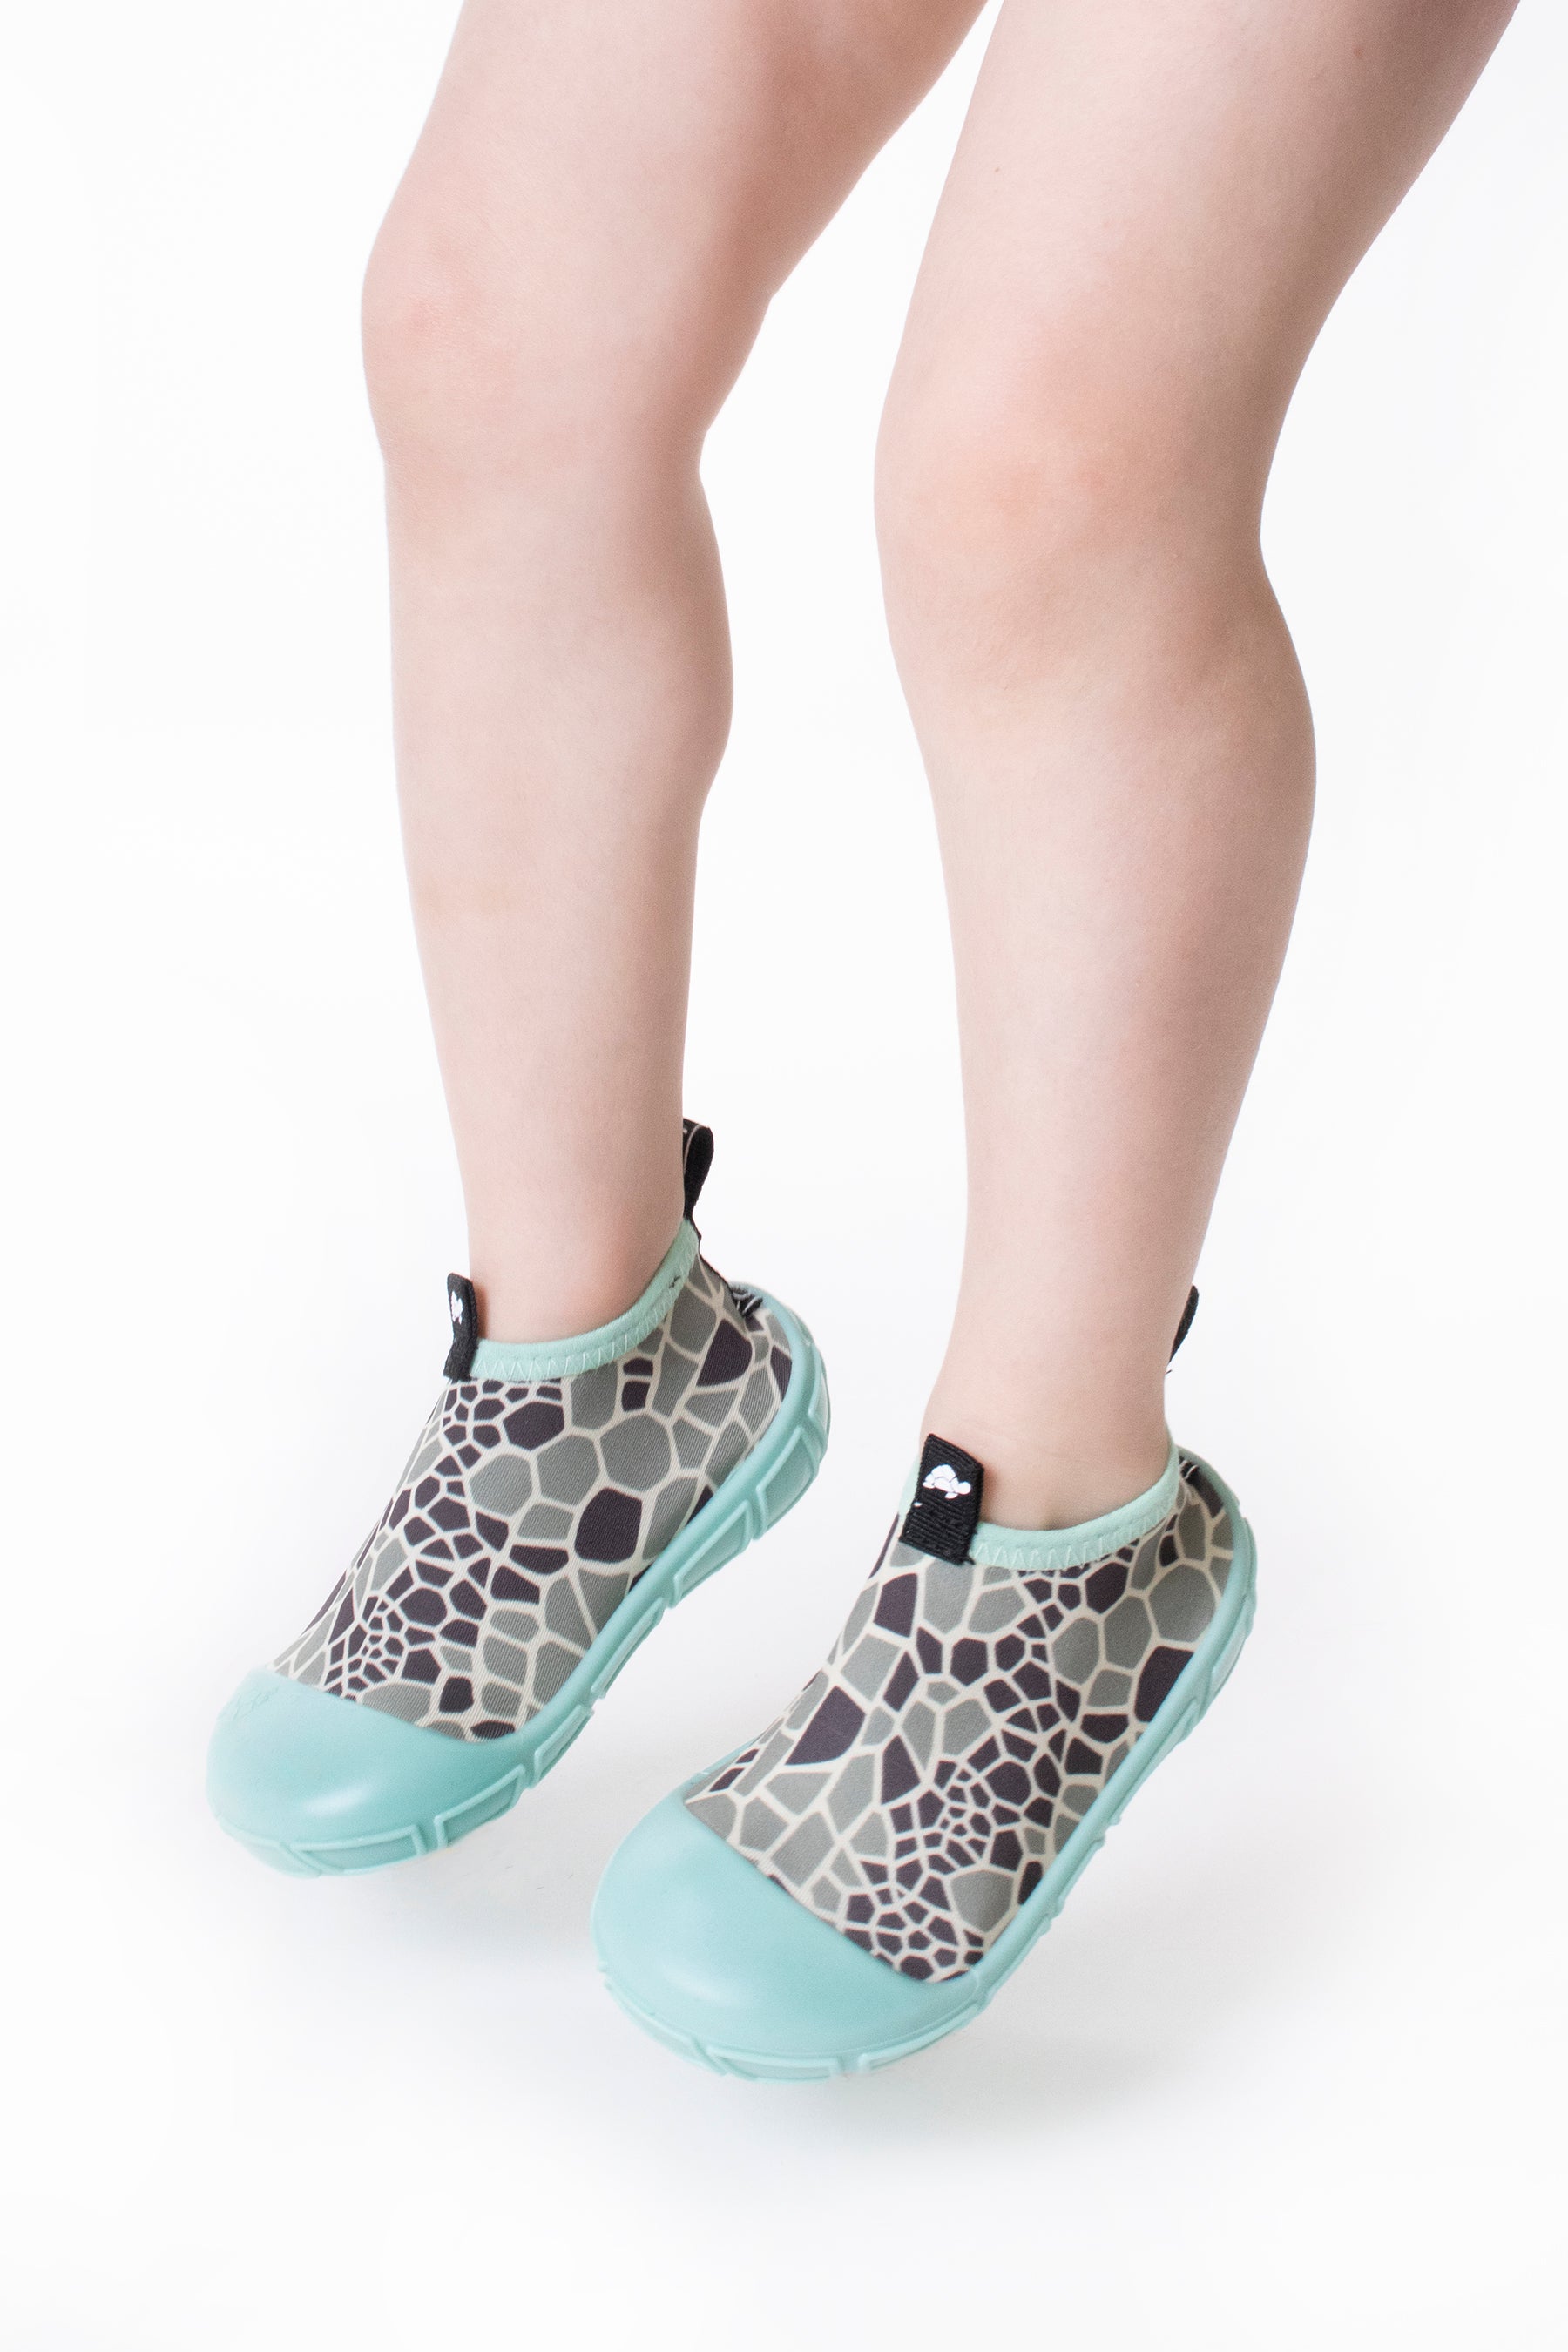 aqua/water shoes in aqua with turtle shell print